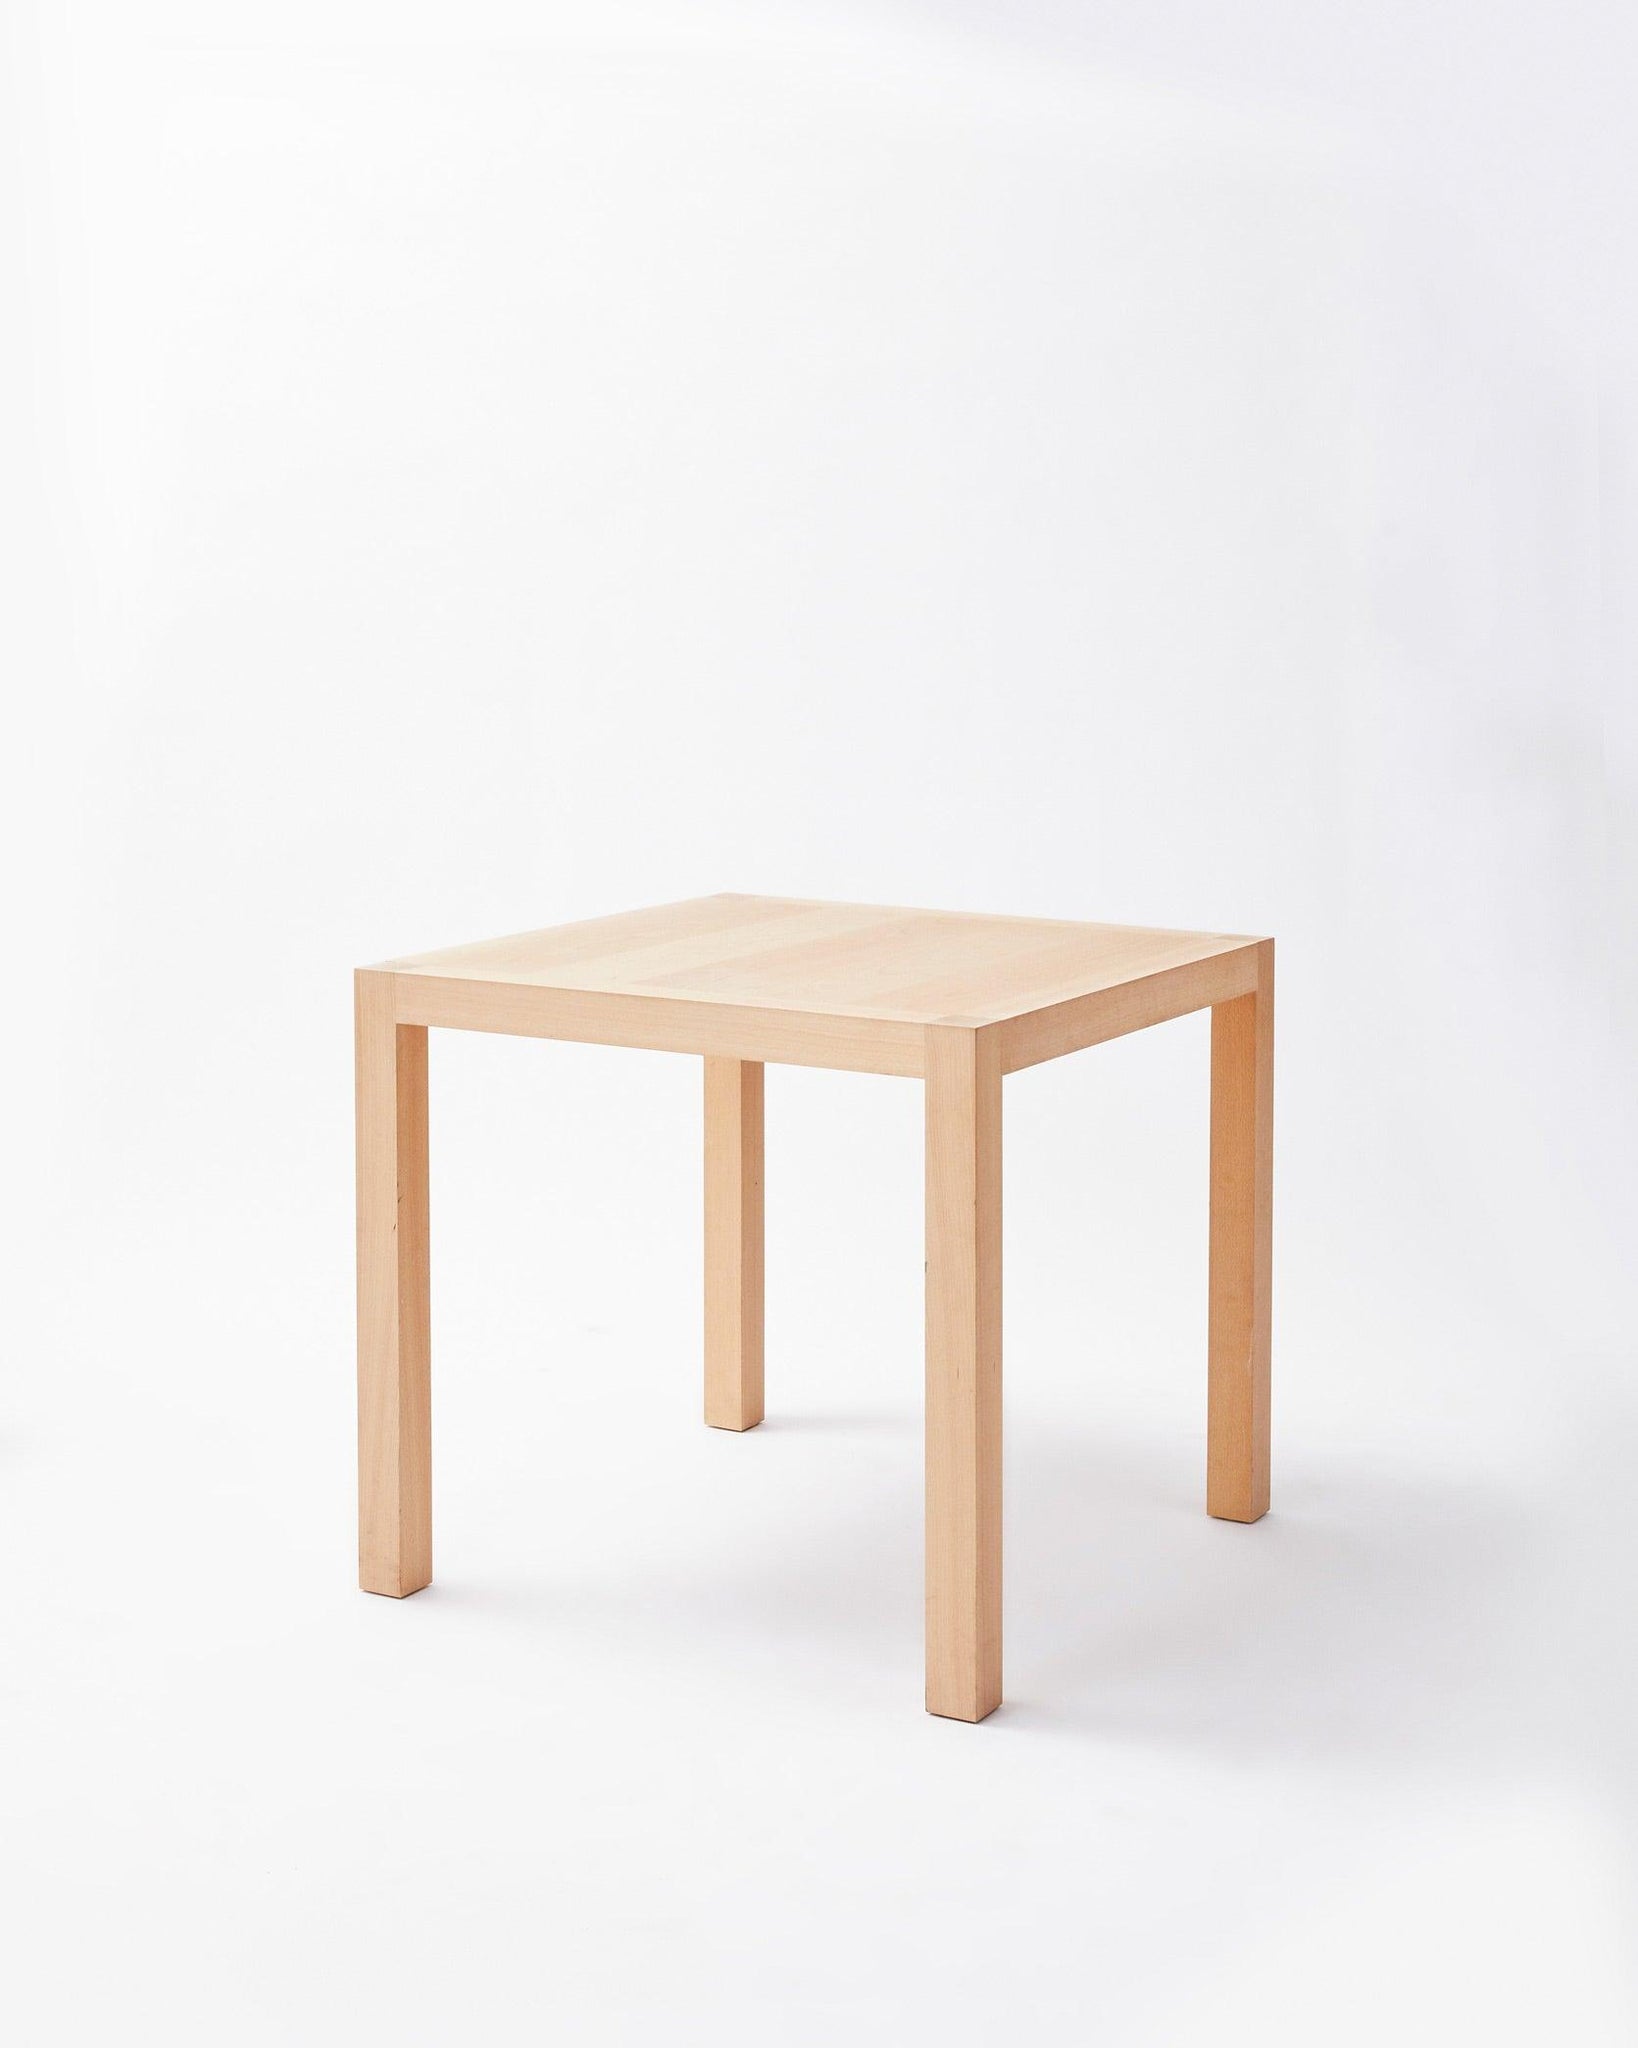 Handmade in denmark table in inclined position on white background